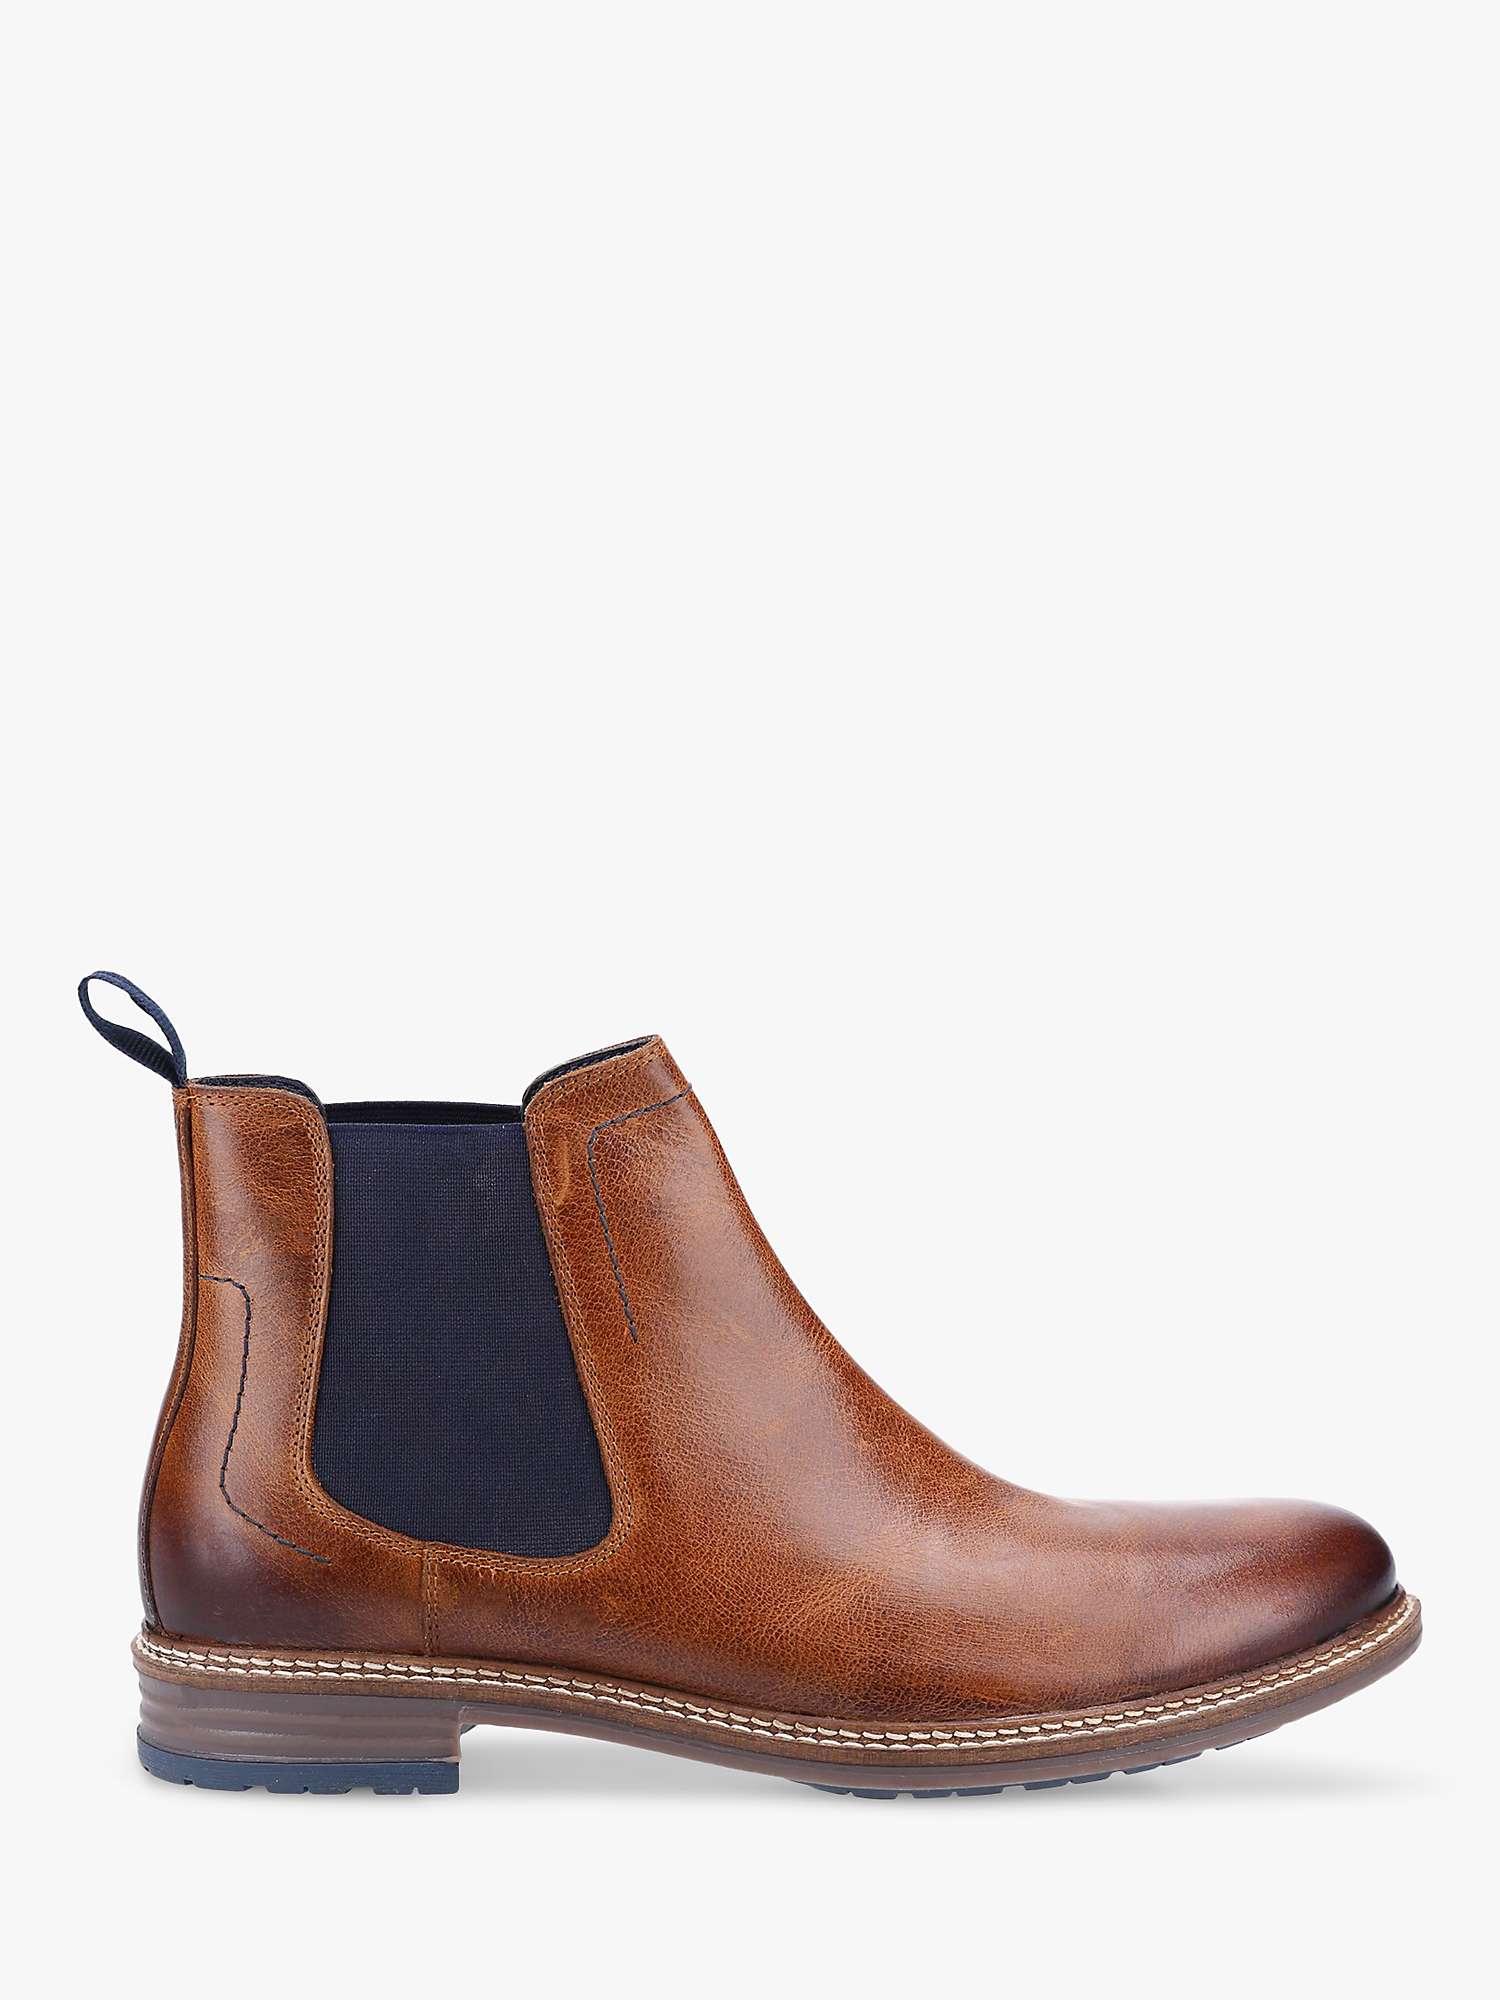 Buy Hush Puppies Justin Chelsea Boots Online at johnlewis.com